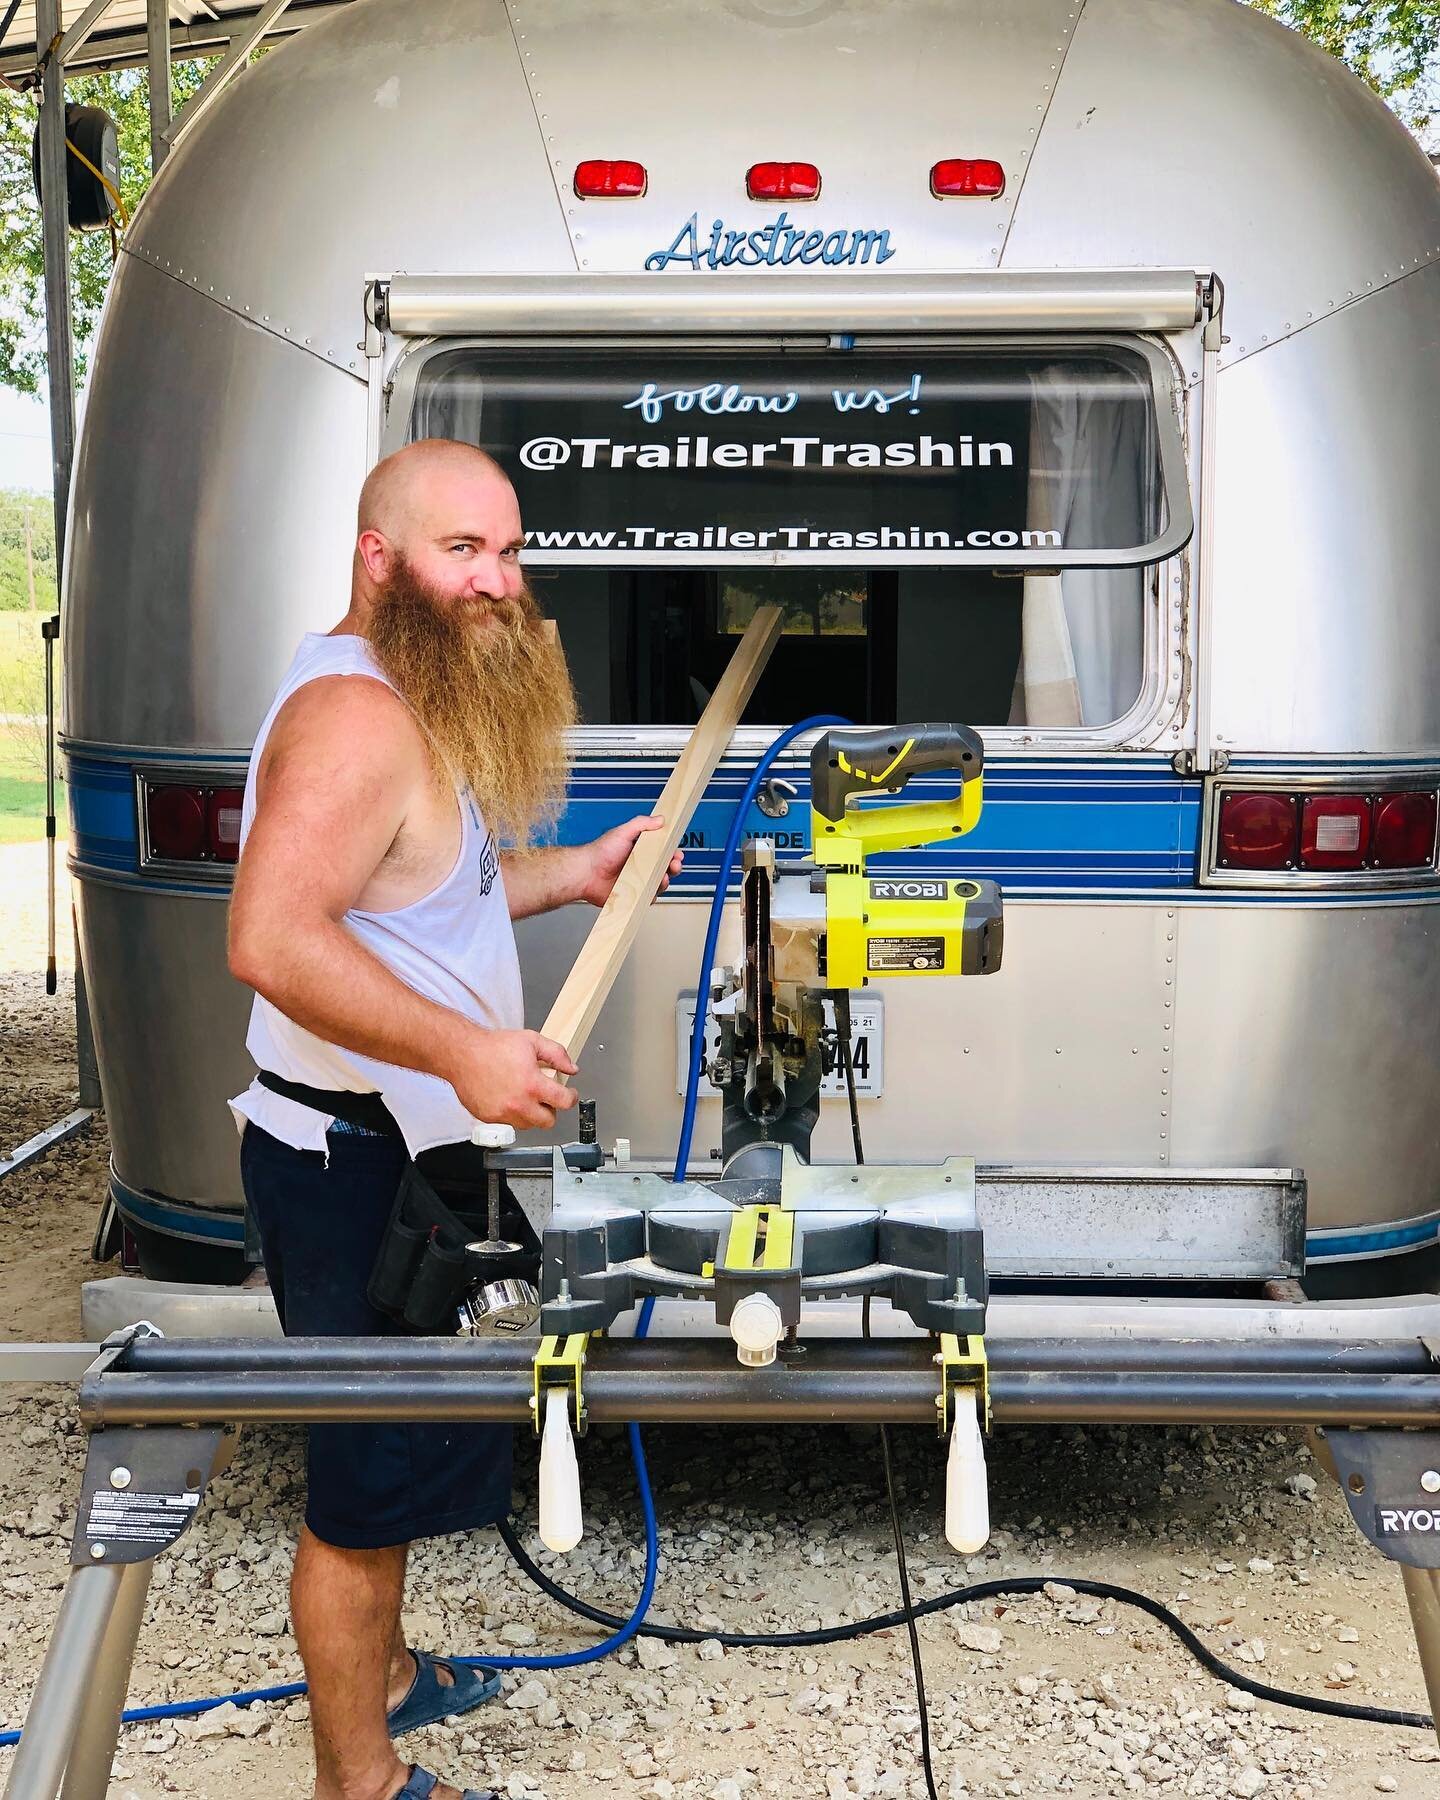 New bed for an old airstream 😏😏 
...... and a pretty mischievous smirk too! Happy Tuesday, y&rsquo;all! 🤙🏼
Will talks about one of the improvements we&rsquo;re making to Lahaina in our stories today 👀🛏